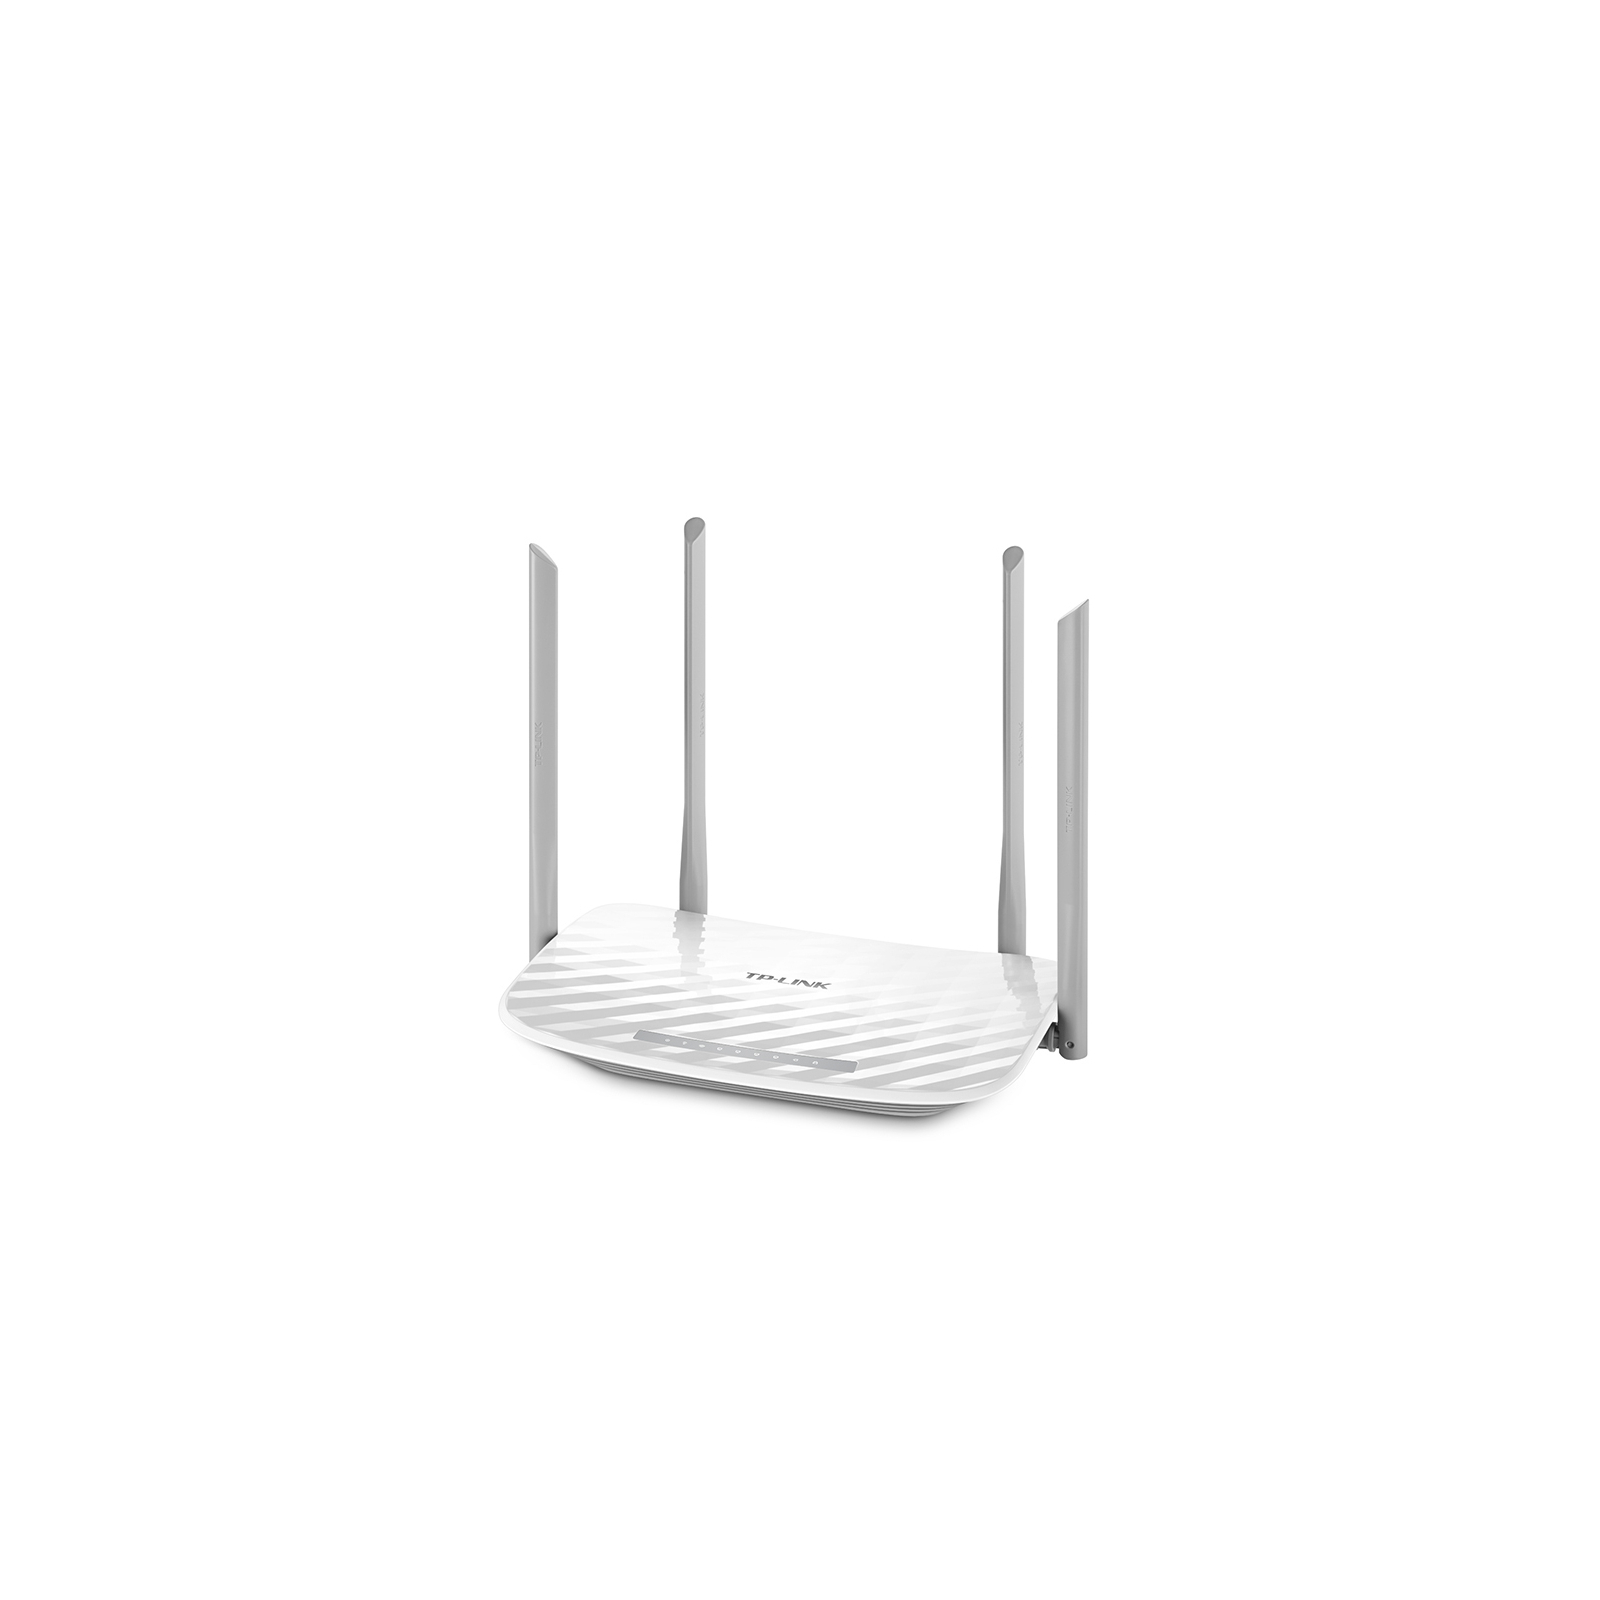 Маршрутизатор TP-Link Archer C25 (Archer-C25)